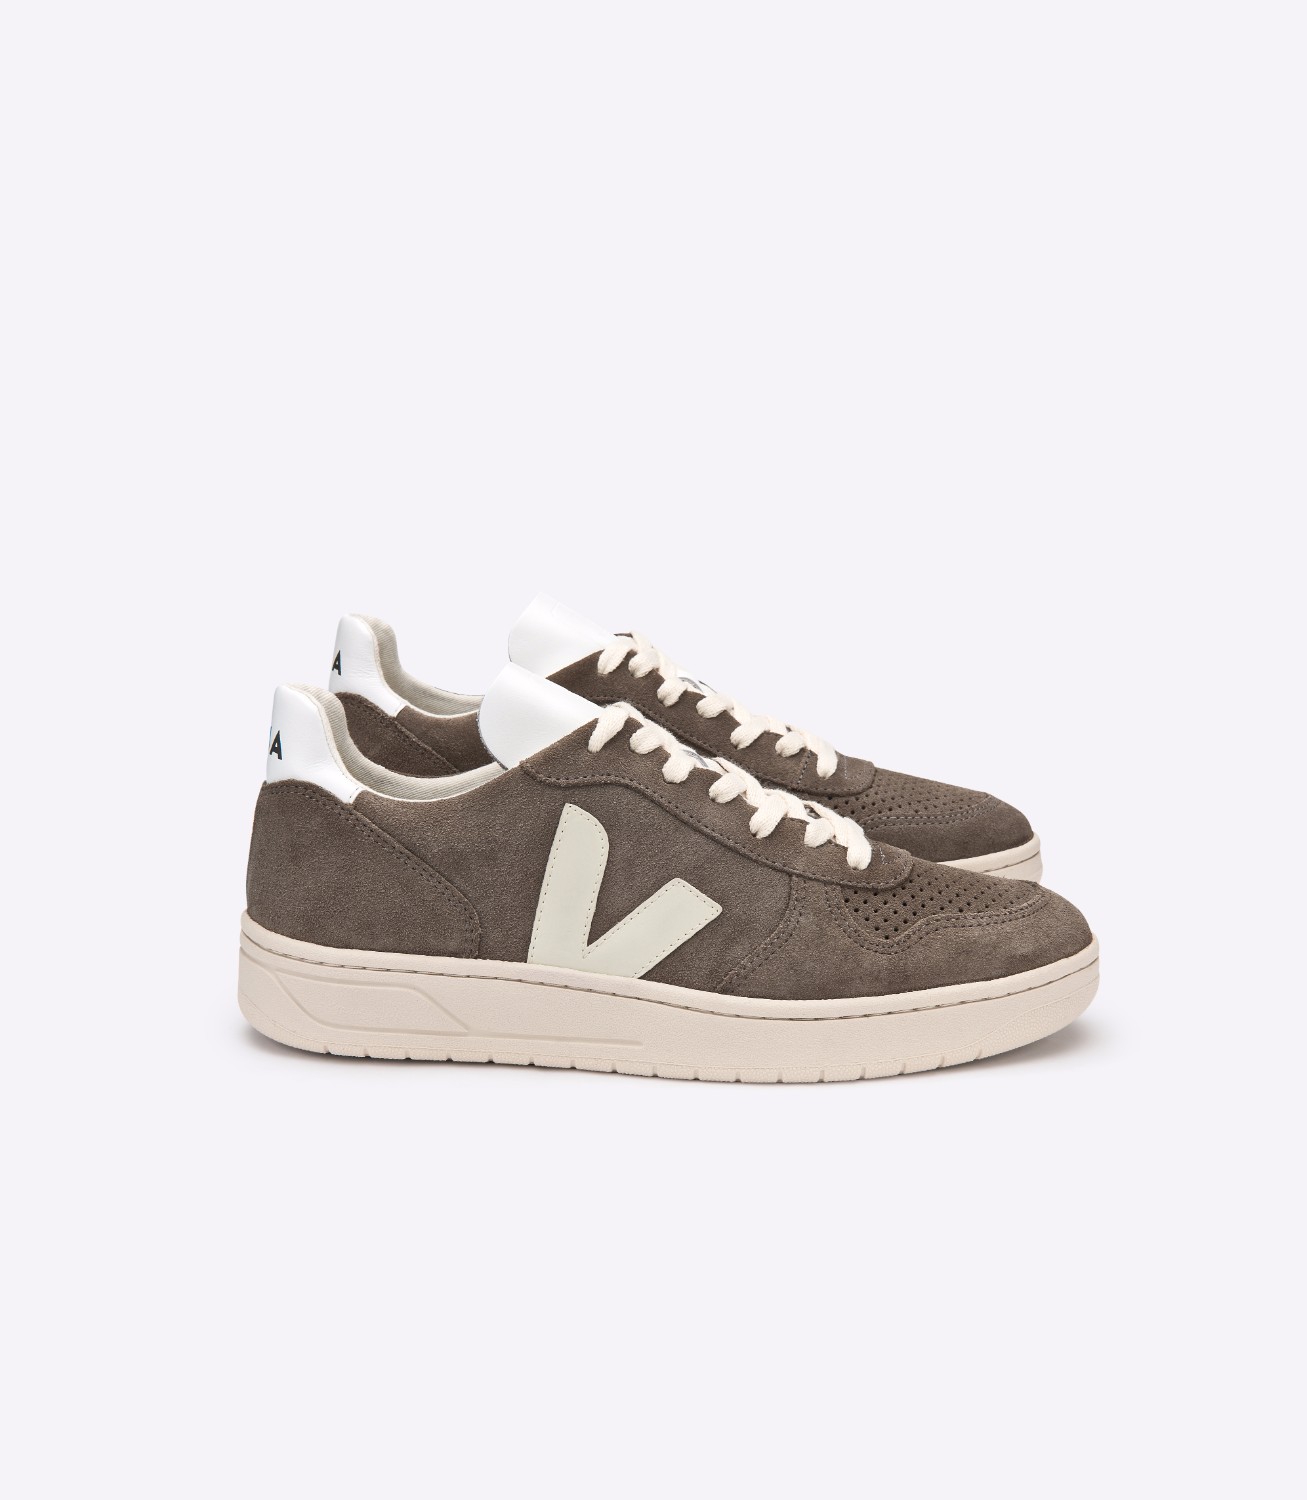 Veja Debuts A New Sneaker Silhouette & Adds Disco Flavor To An Old Fave